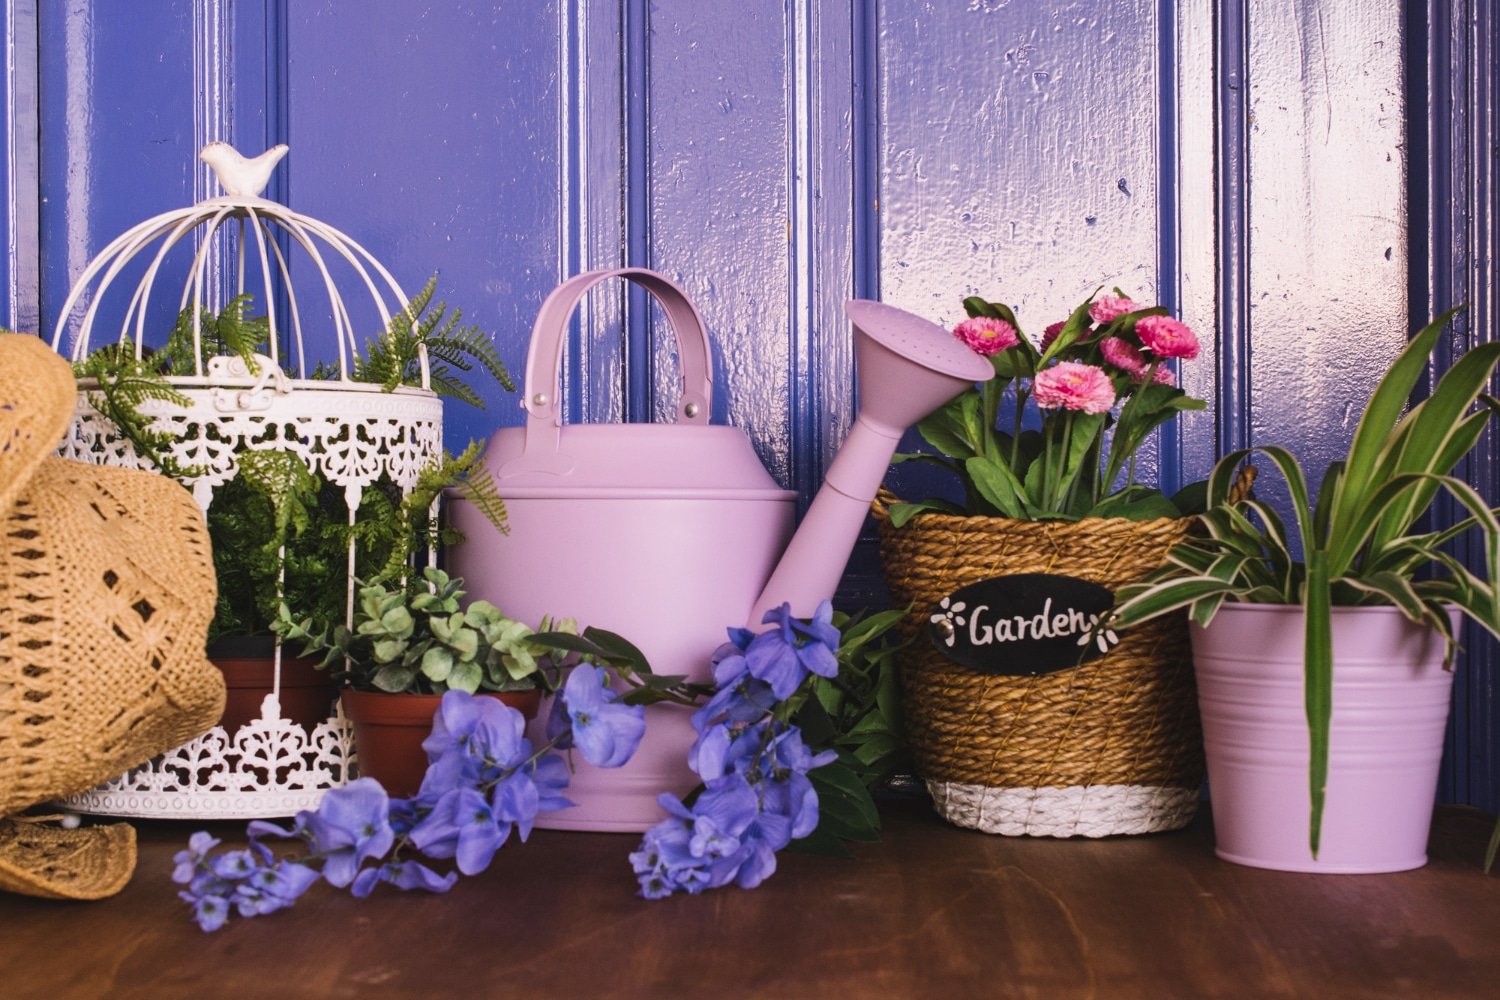 Decorate Your Home With Life In Lilac’s Vintage-Inspired Homeware